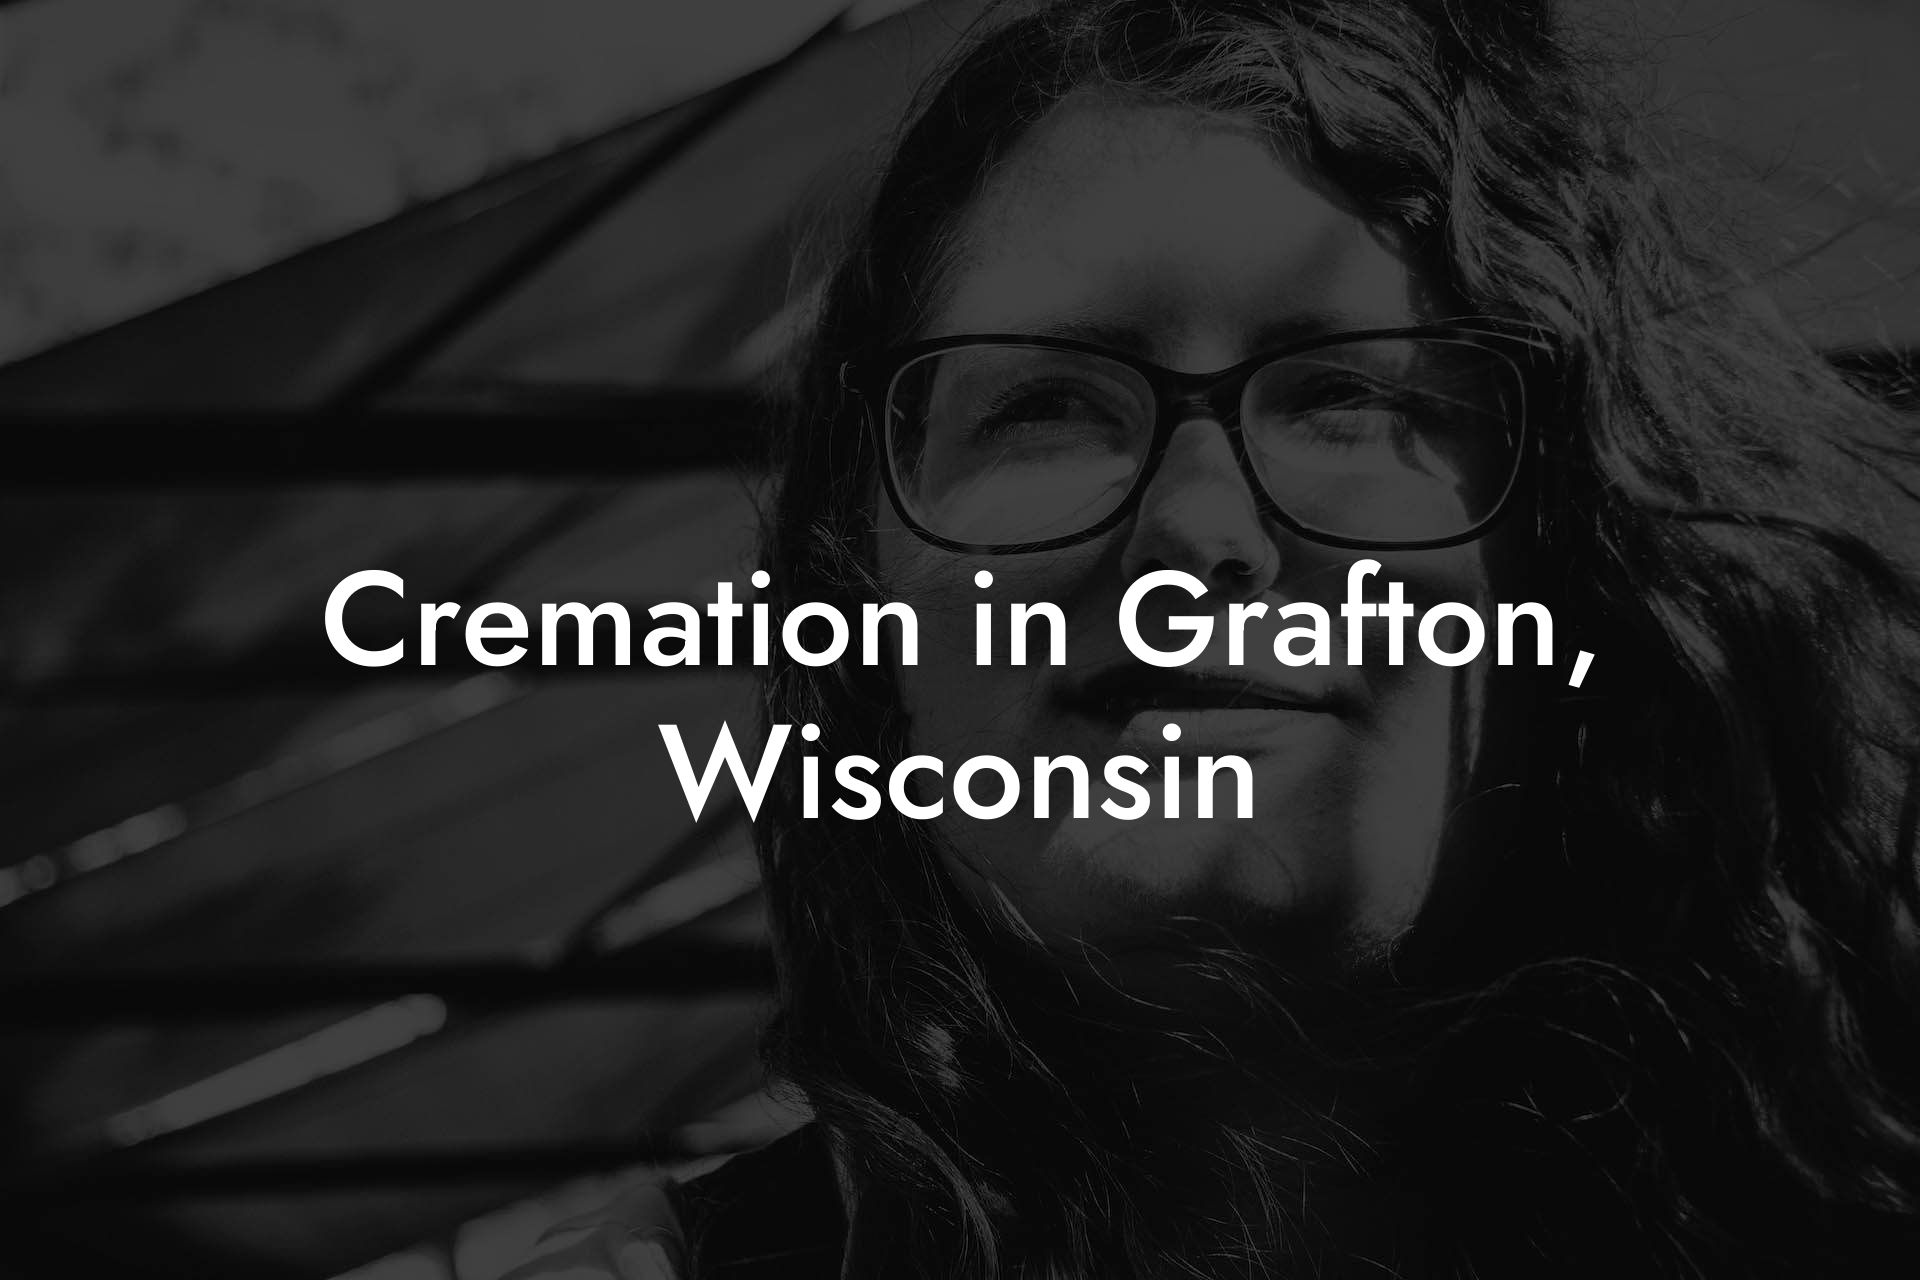 Cremation in Grafton, Wisconsin